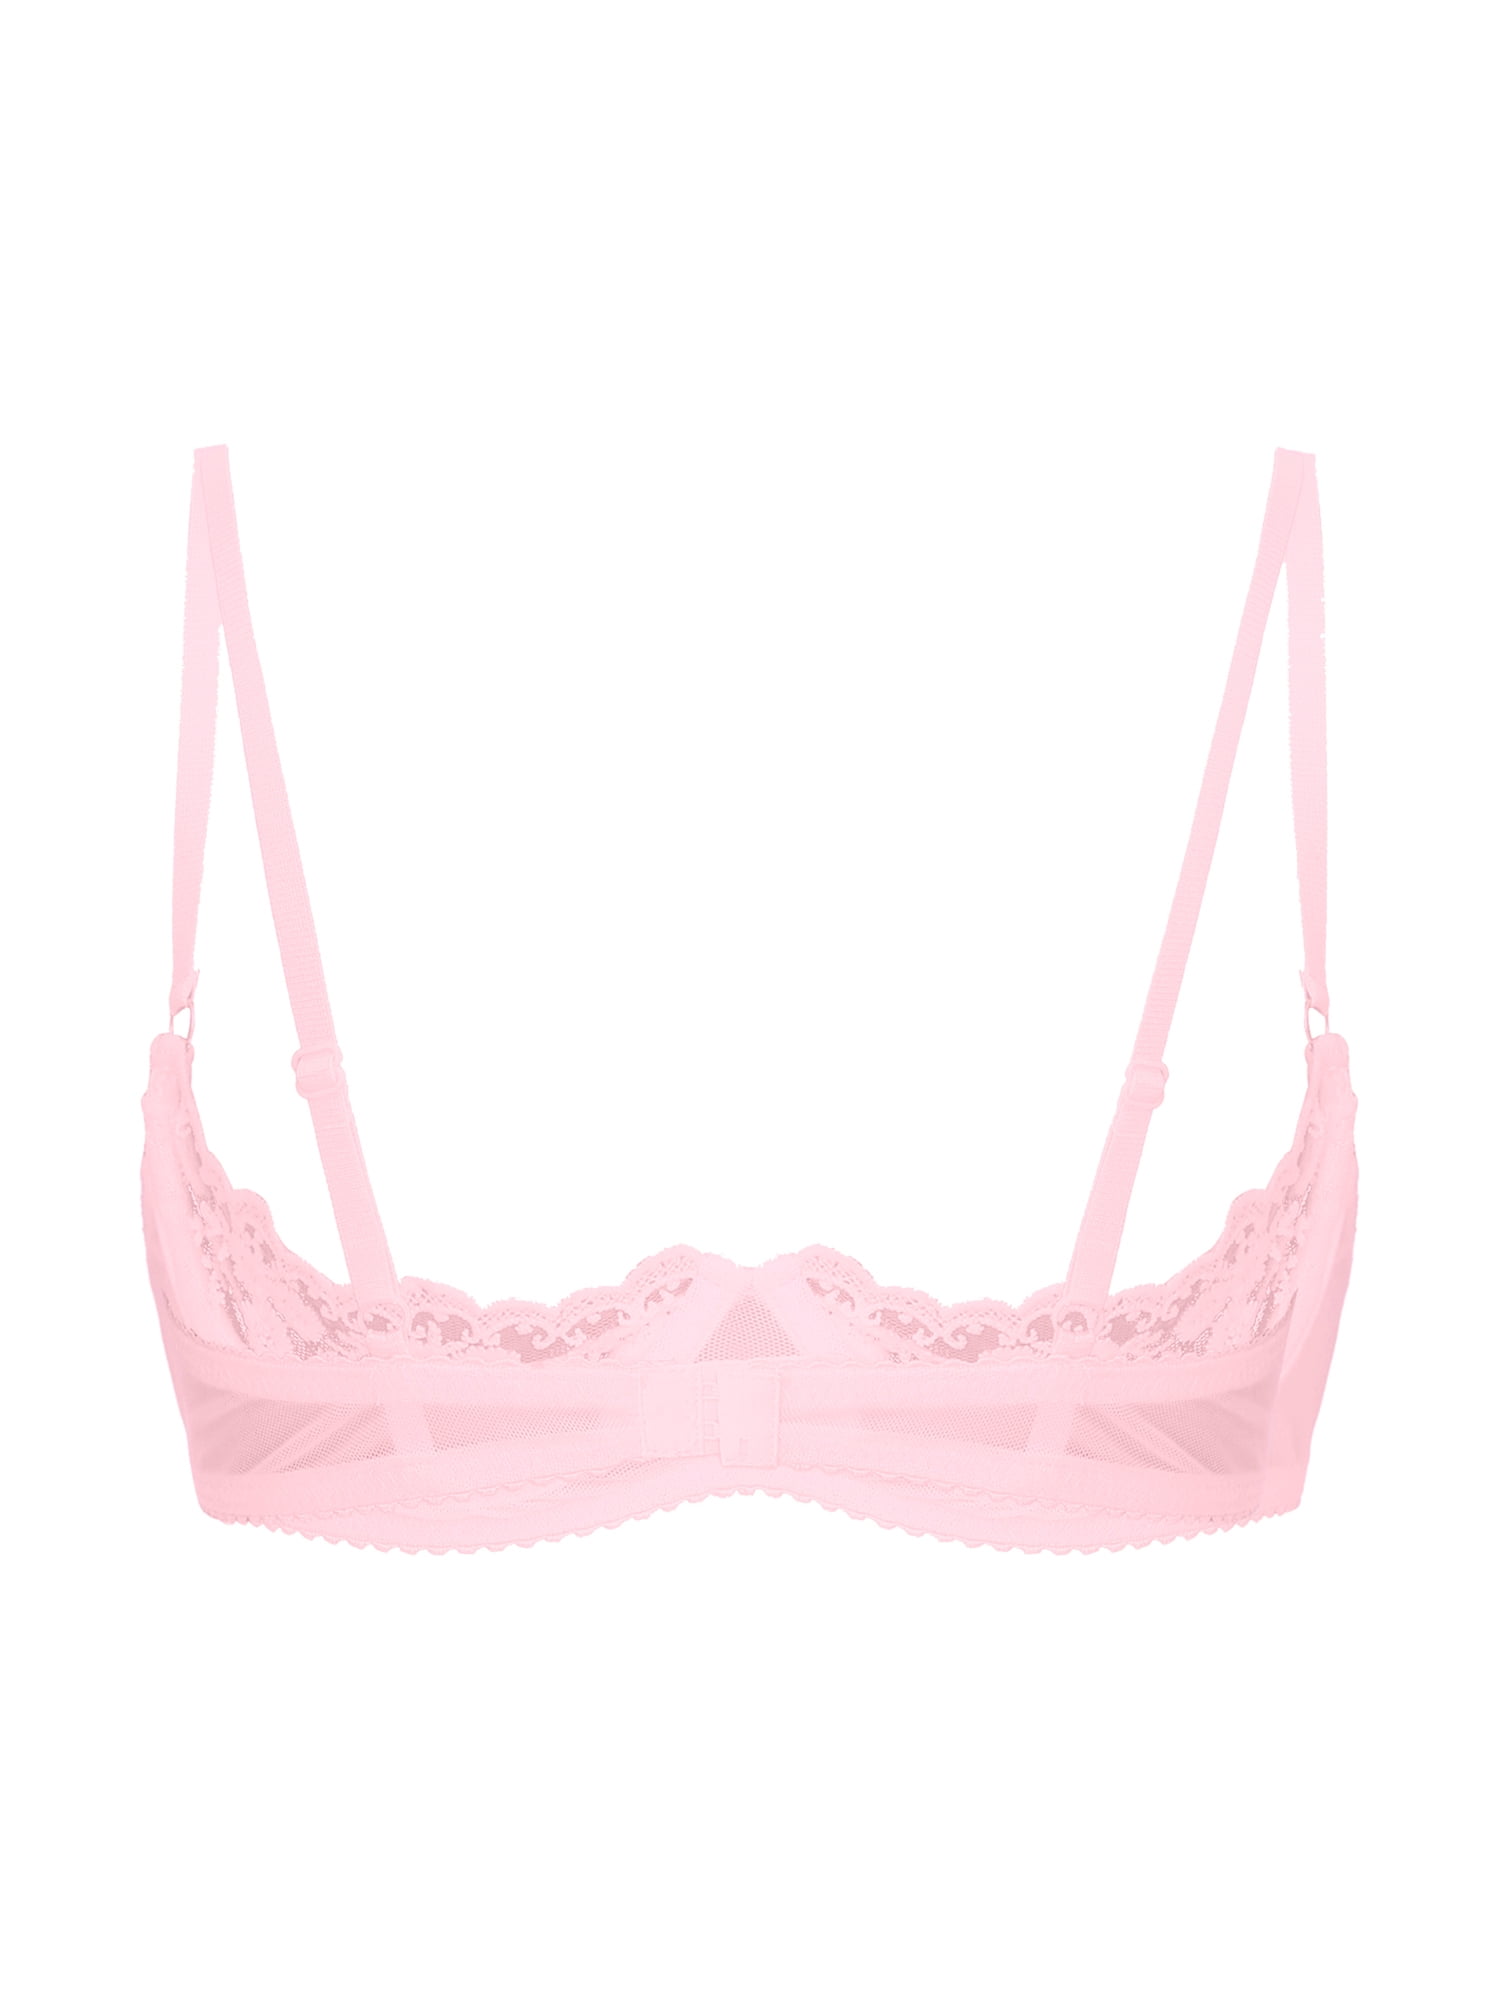 Aislor Womens Underwire Open Nipple Bra Sheer Lace Unlined Push Up Cupless  Shelf Bras Size S-5XL Pink XL